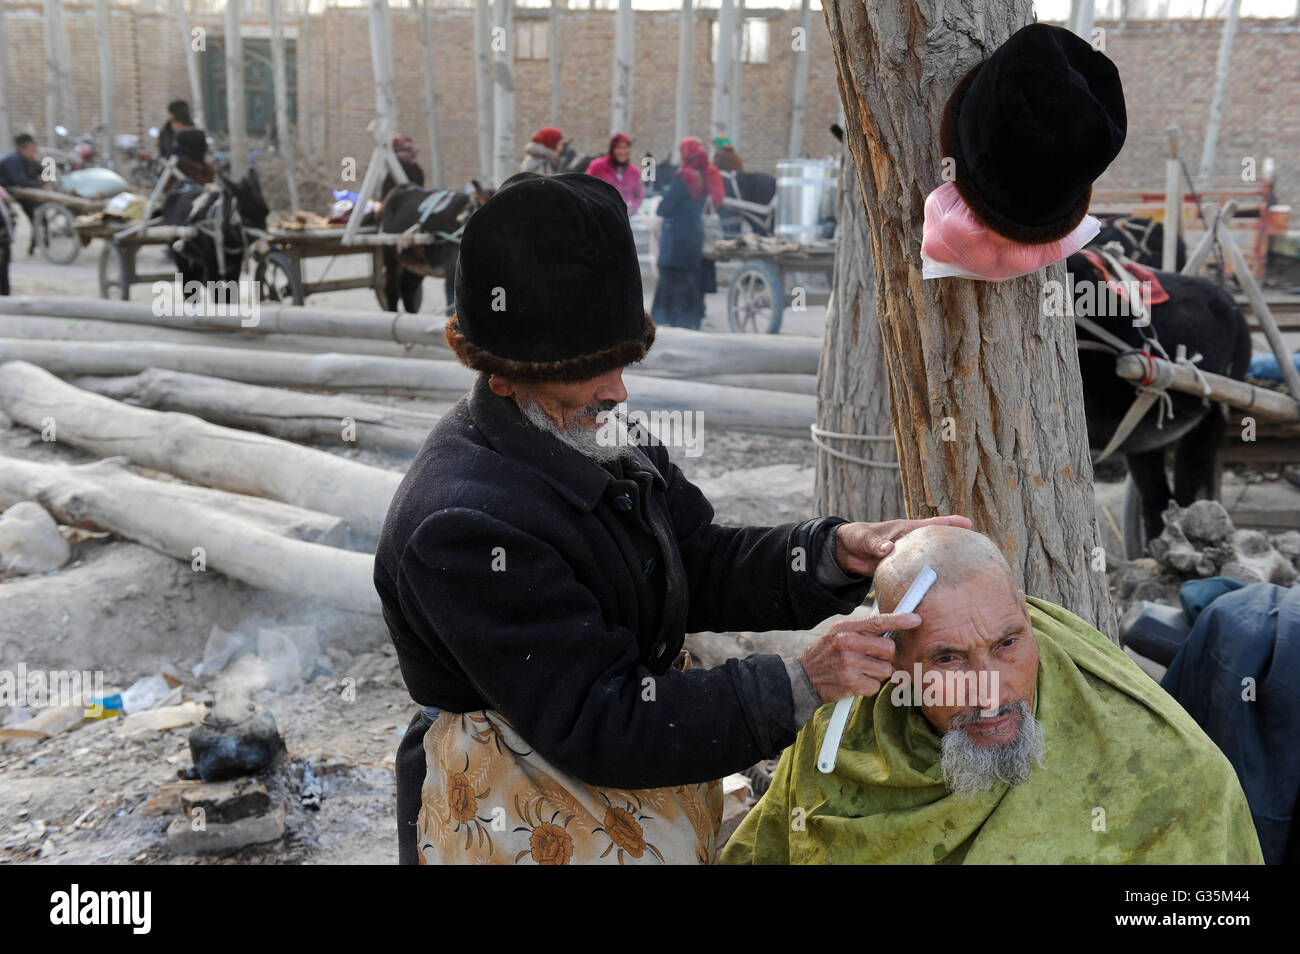 CHINA, province Xinjiang, market day in uighur village Jin Erek near city Kashgar where uyghur people are living, open air barber shop, head and beard shaving during freezing temperatures Stock Photo